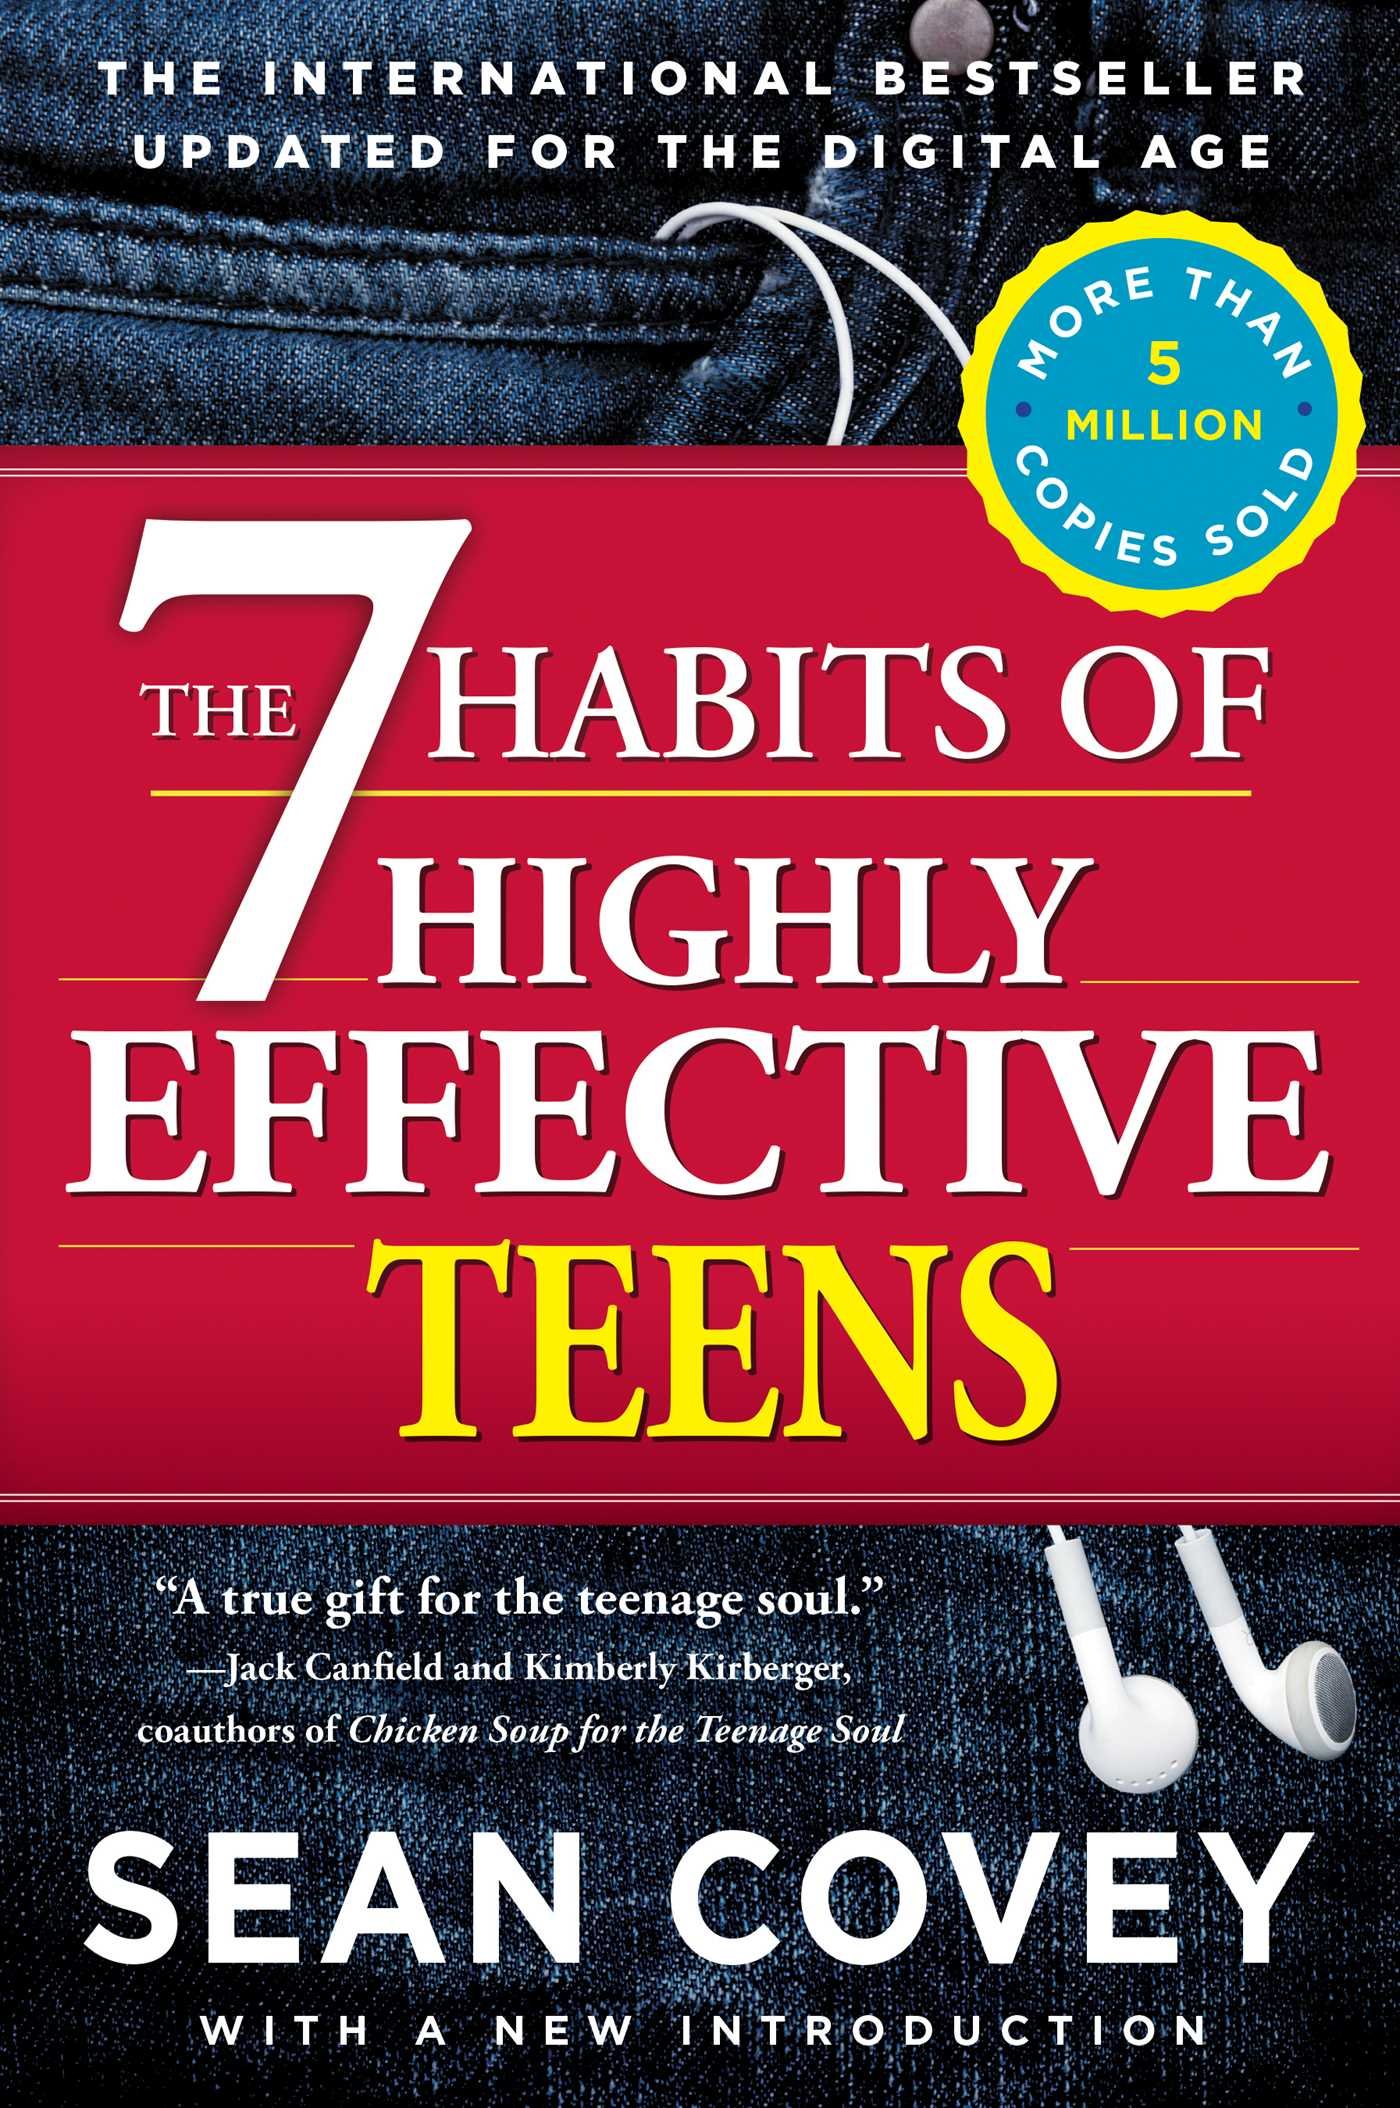 The 7 Habits of Highly Effective Teens (Updated) [Paperback]